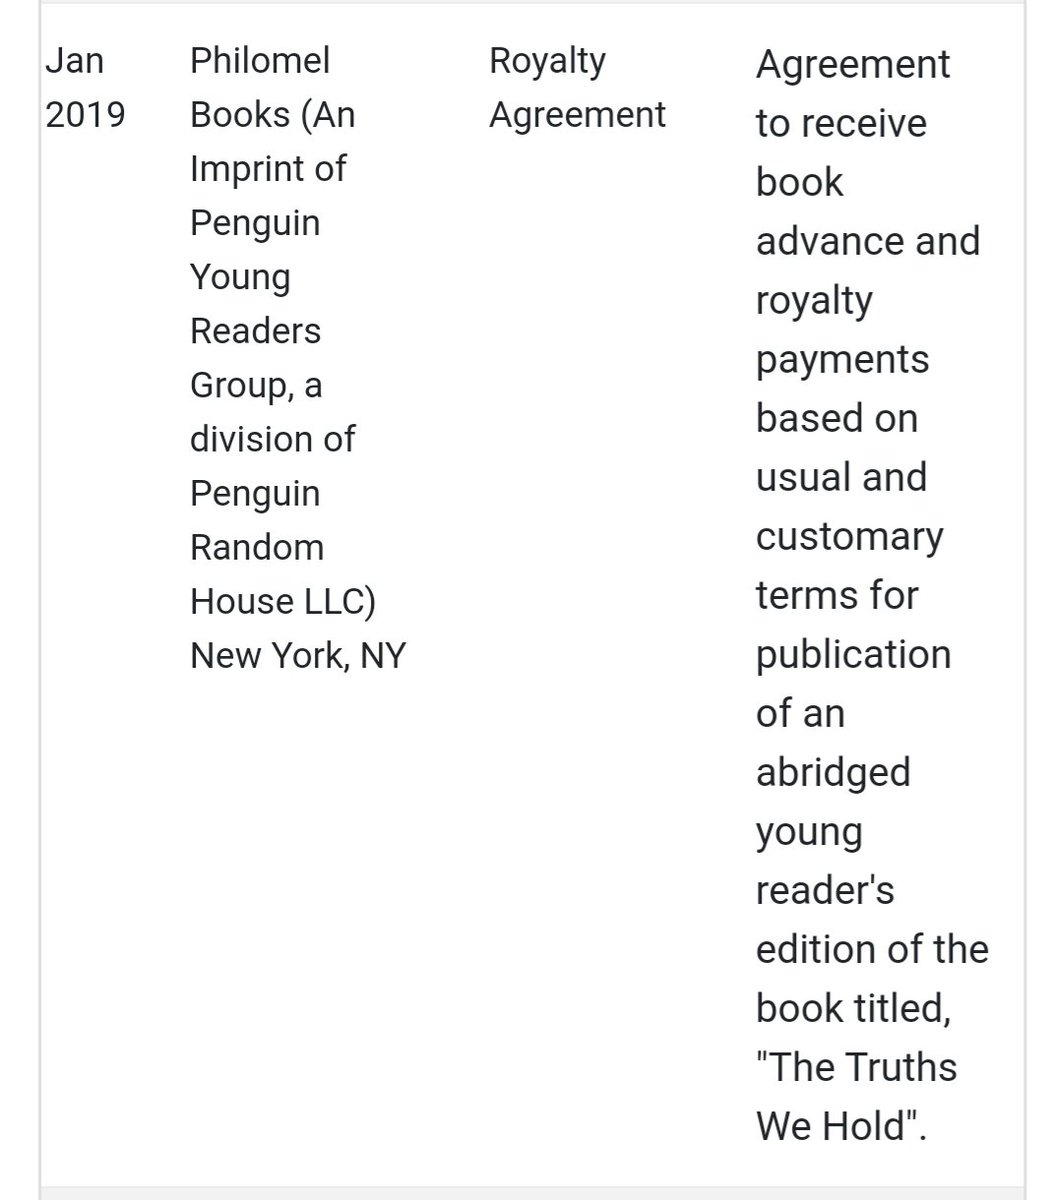 As I said before, Kamala Harris pulled in $270,000+ in advance royalties from her book deal in 2019.That's where a large bulk of her income came that year.Now, let's look at some of their investments.